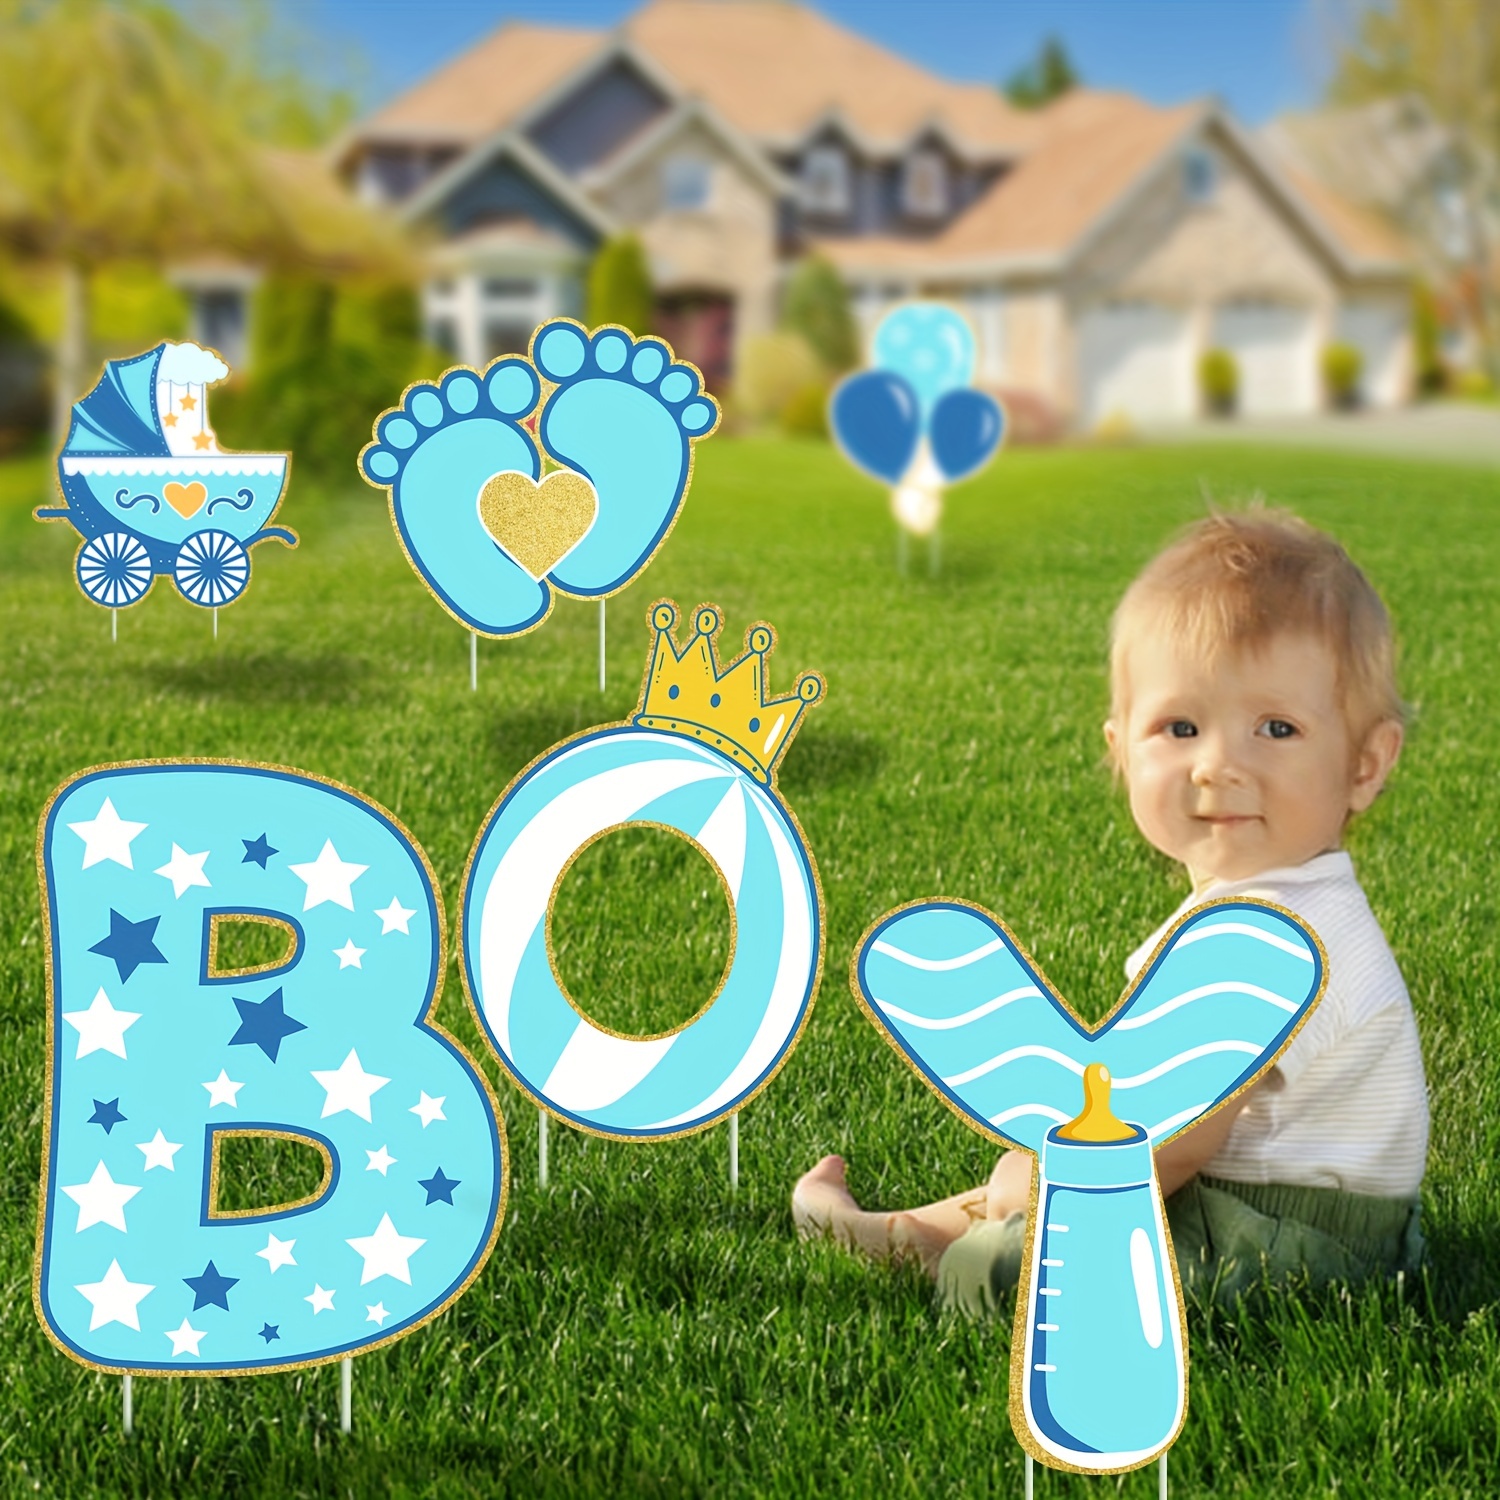 Welcome Home Baby Shower Decorations Boy, Blue Gender Reveal